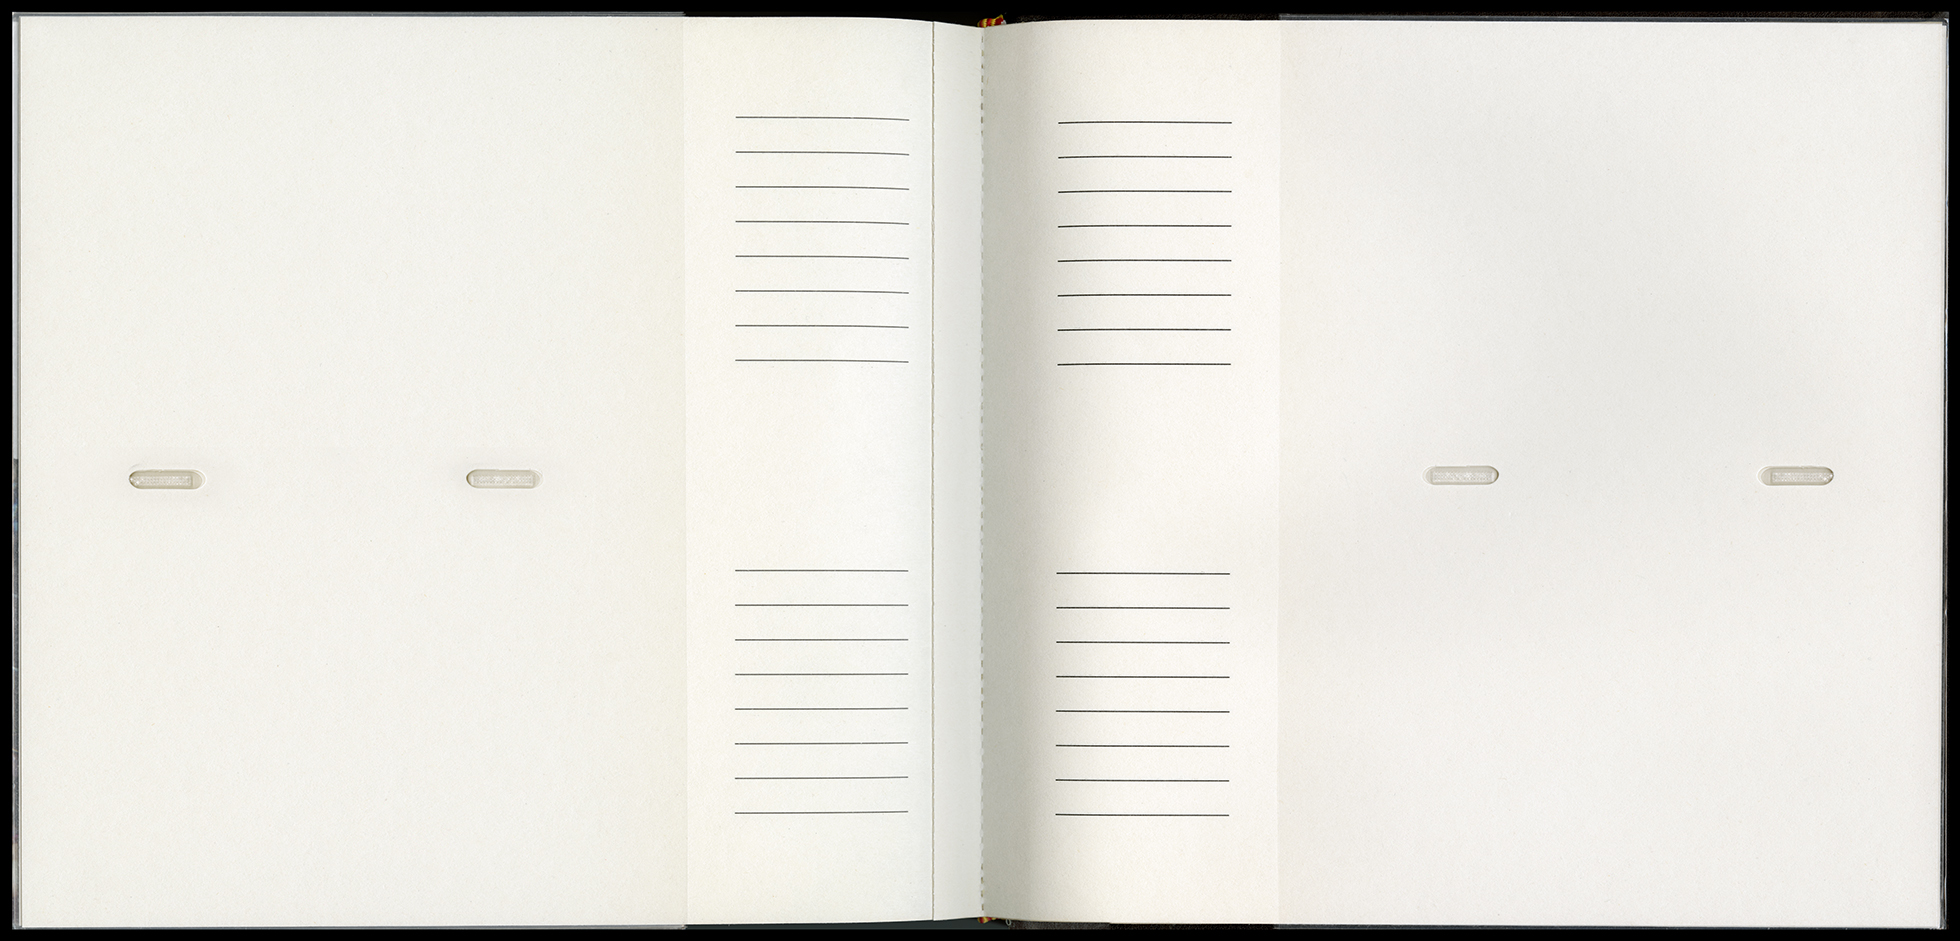 Untitled (Blank Pages)